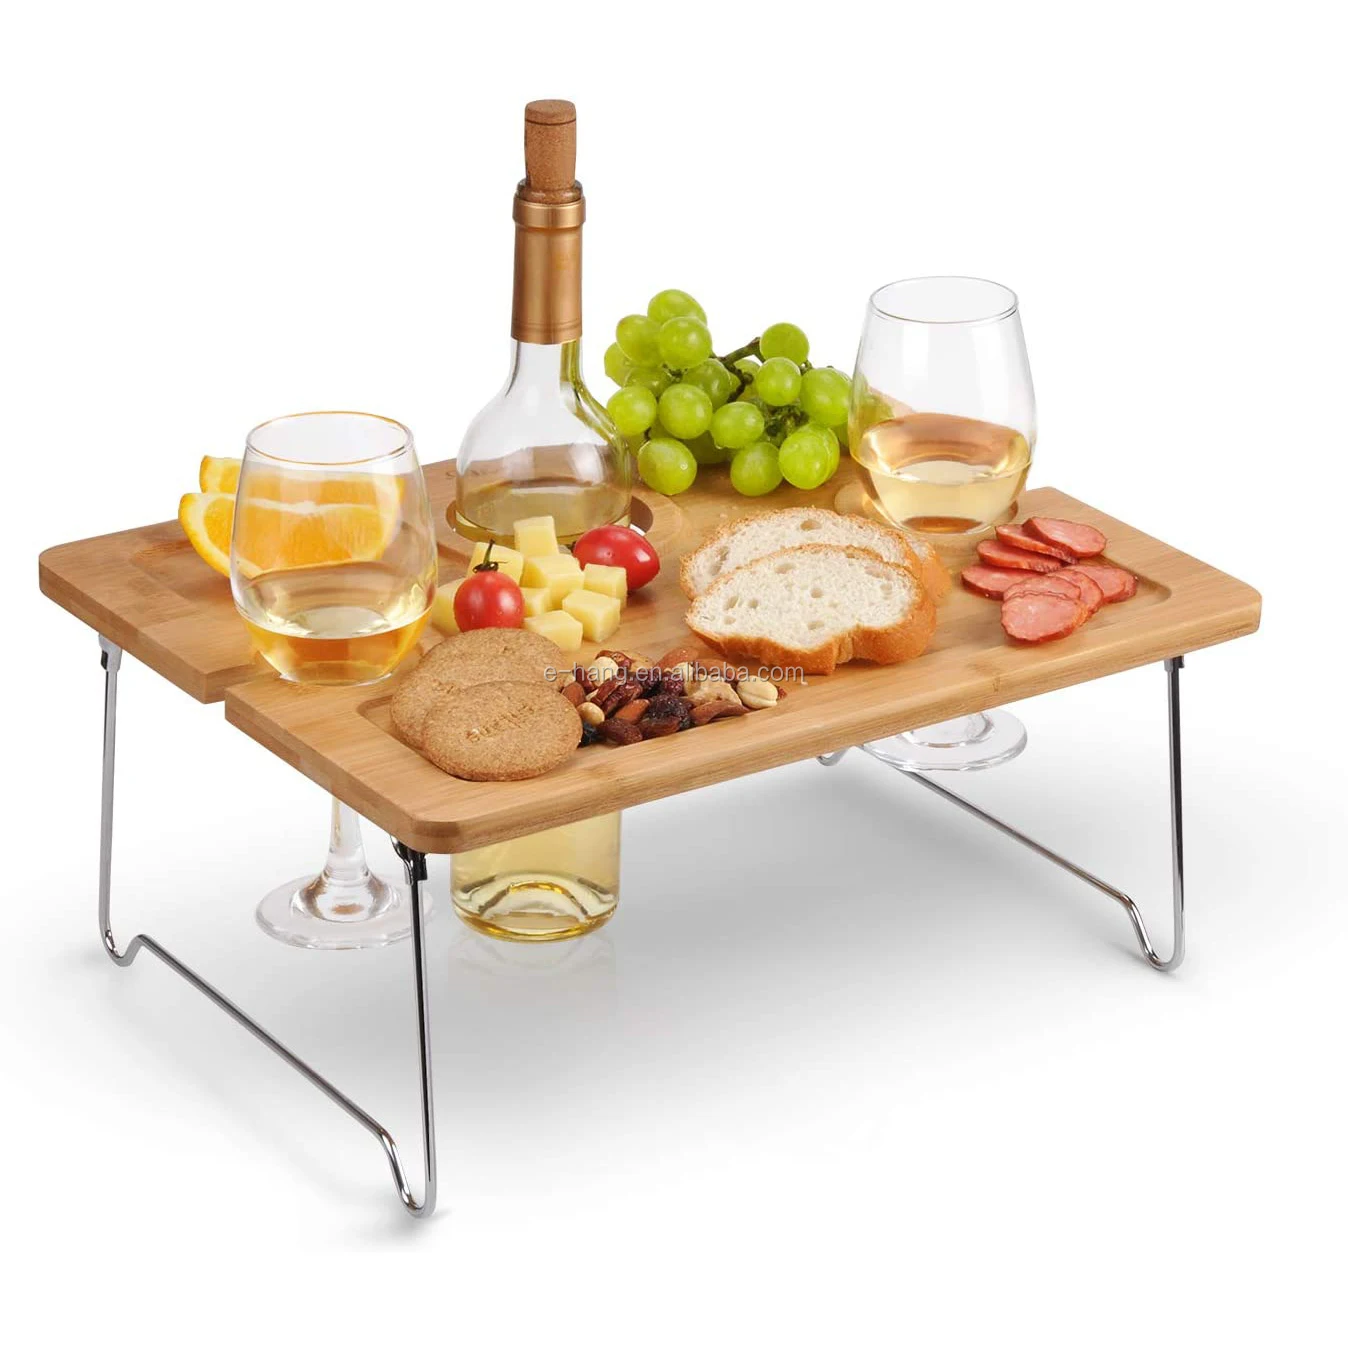 Wine Picnic Table Folding Portable Bamboo Wine Glasses & Bottle Snack and Cheese Holder Tray for Concerts at Park, Beach